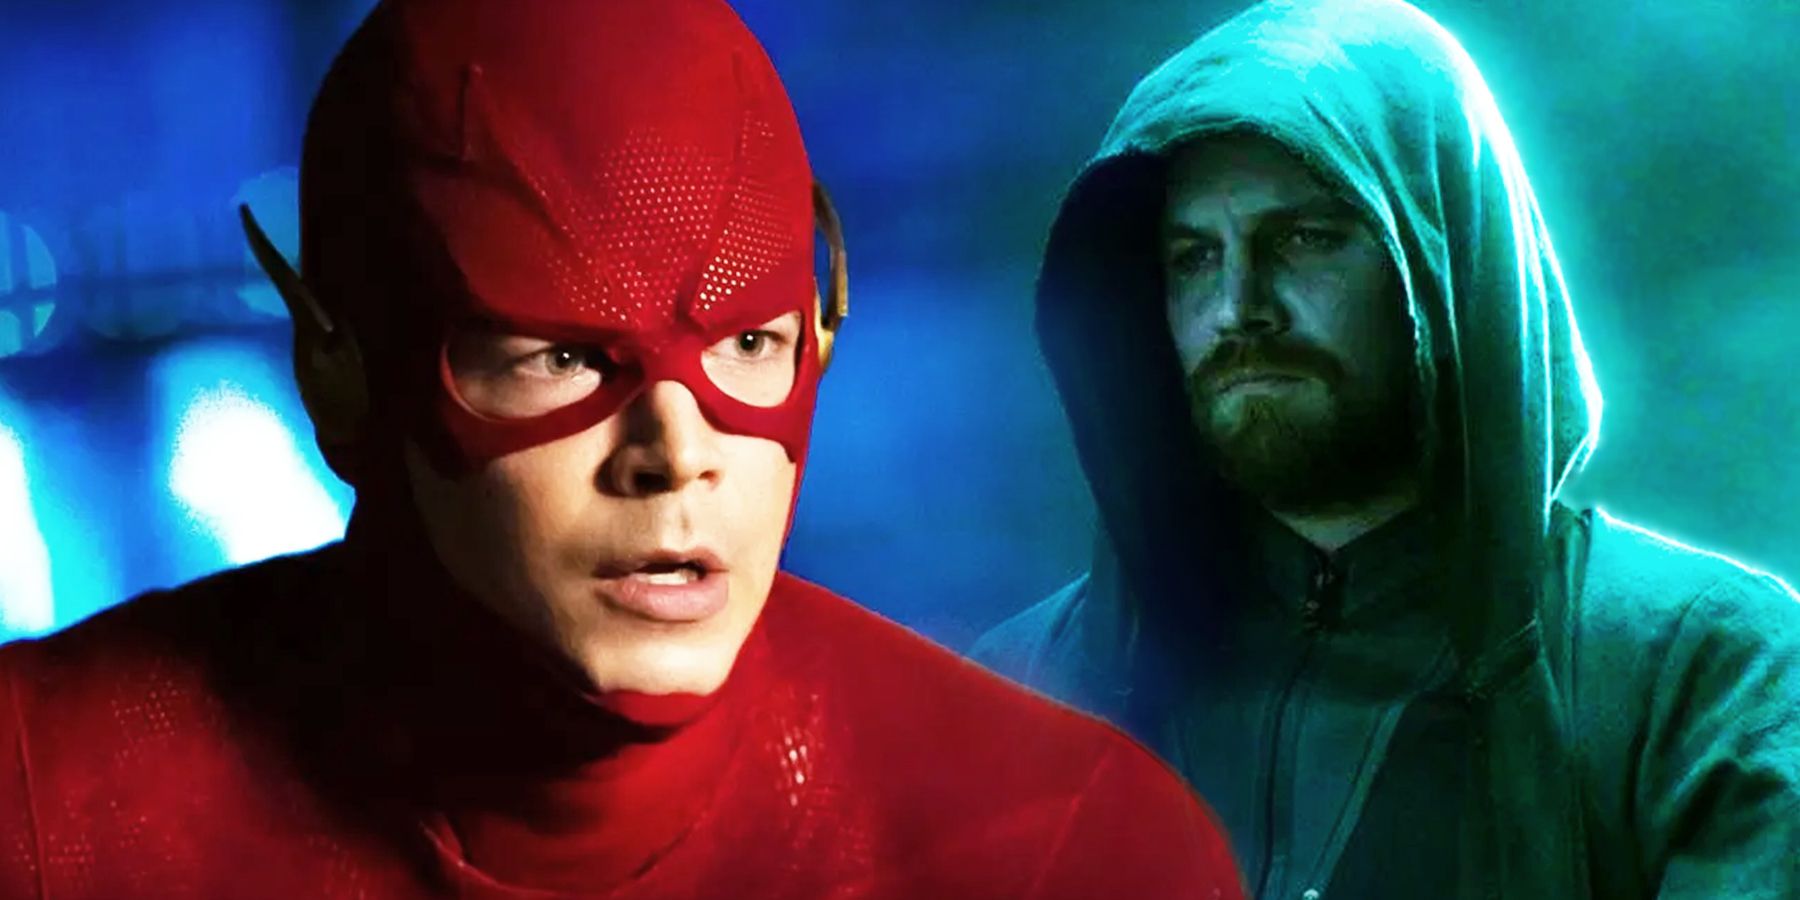 Stephen Amell S Flash Return Only Works As The Spectre